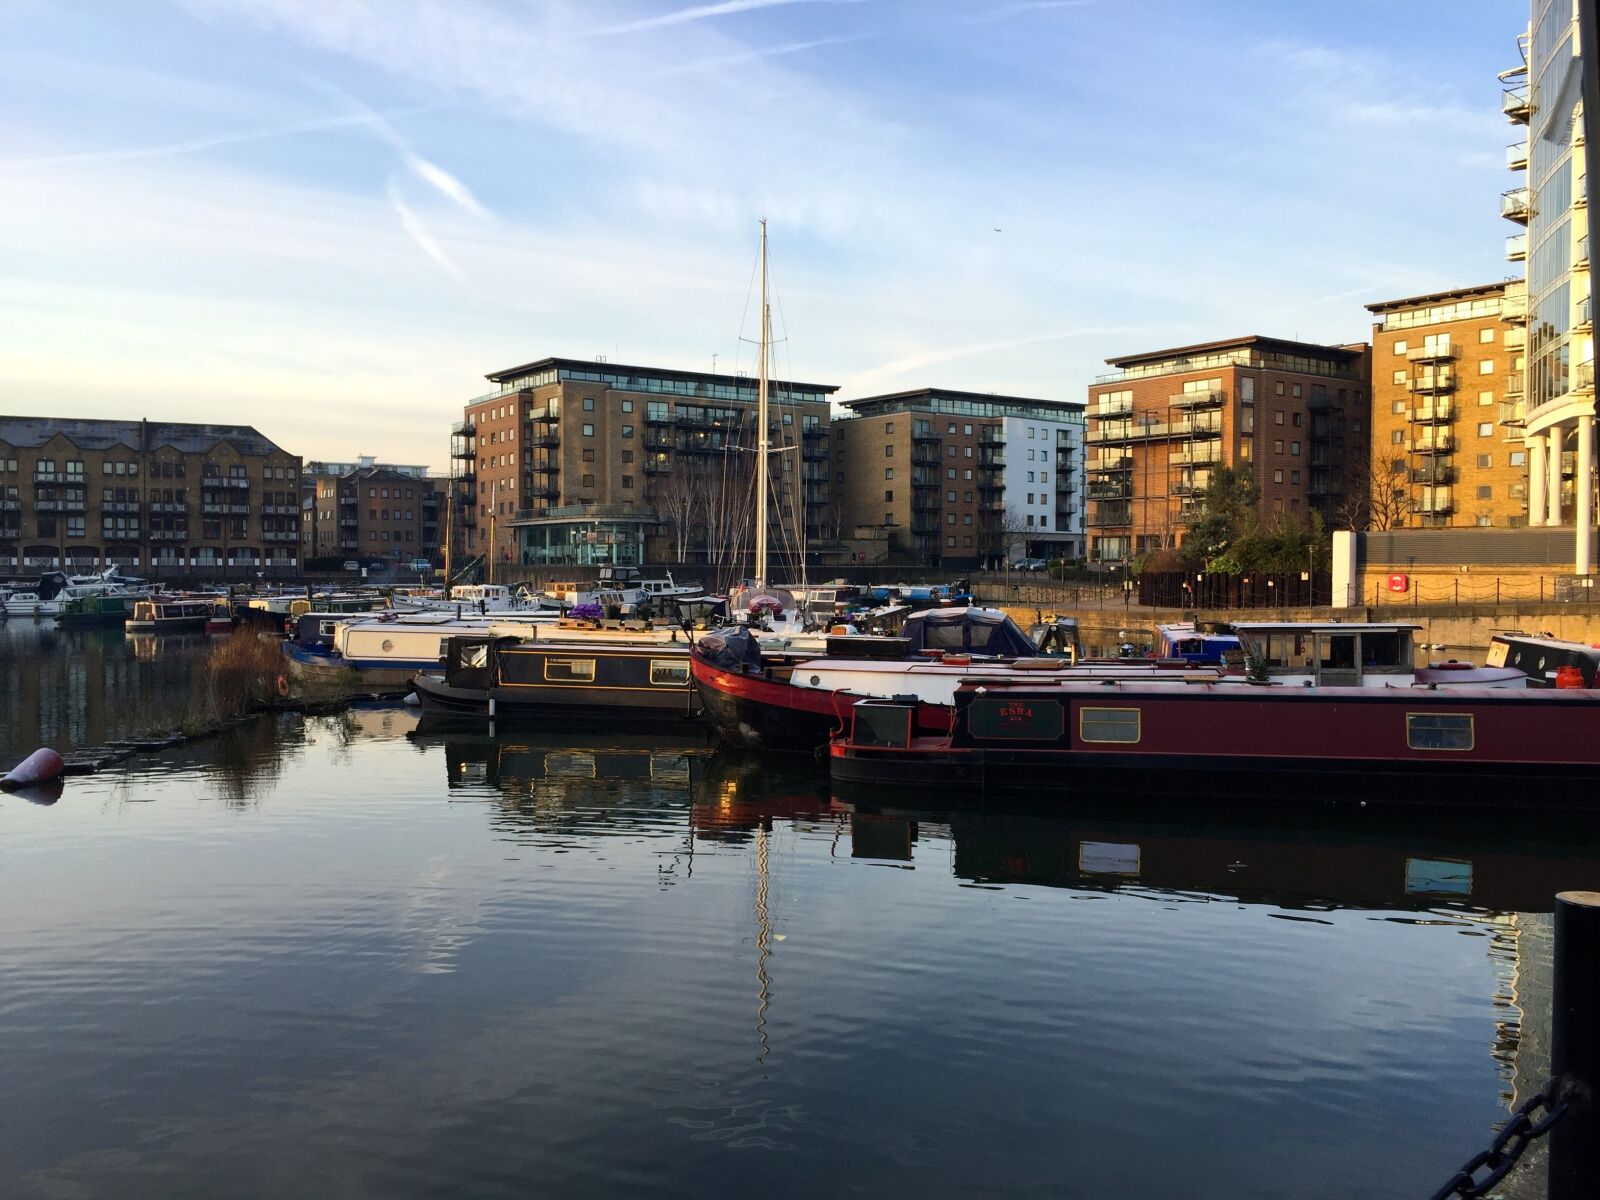 Apple iPhone 6 sample photo. Limehouse basin, docklands, housing photography